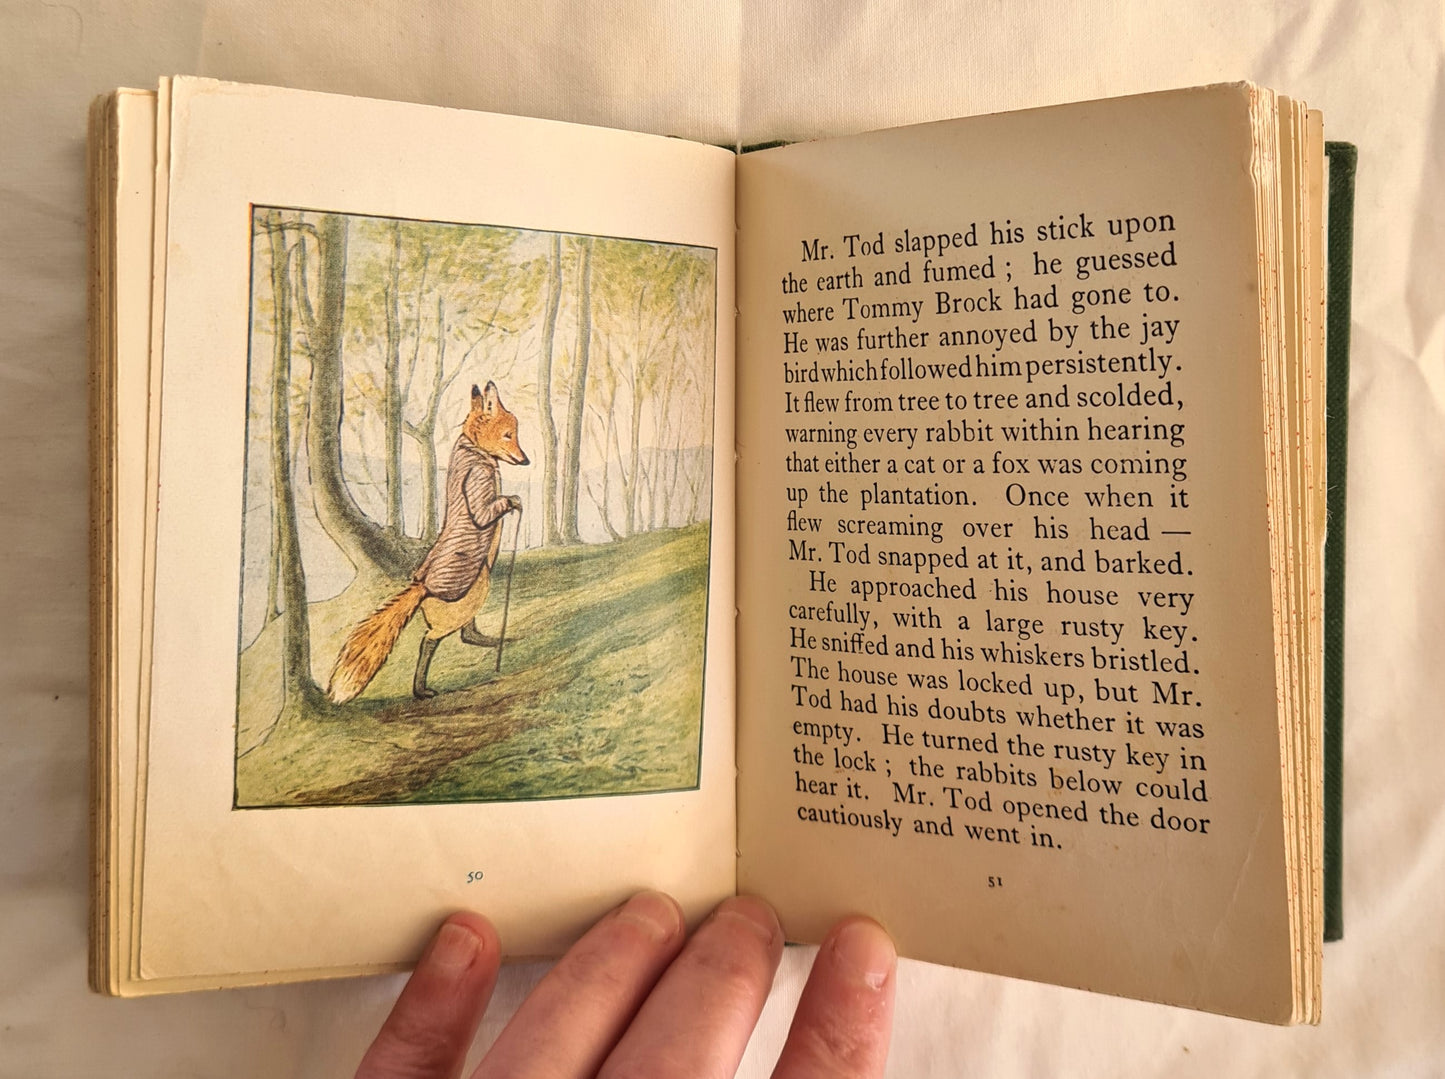 The Tale of Mr Tod by Beatrix Potter